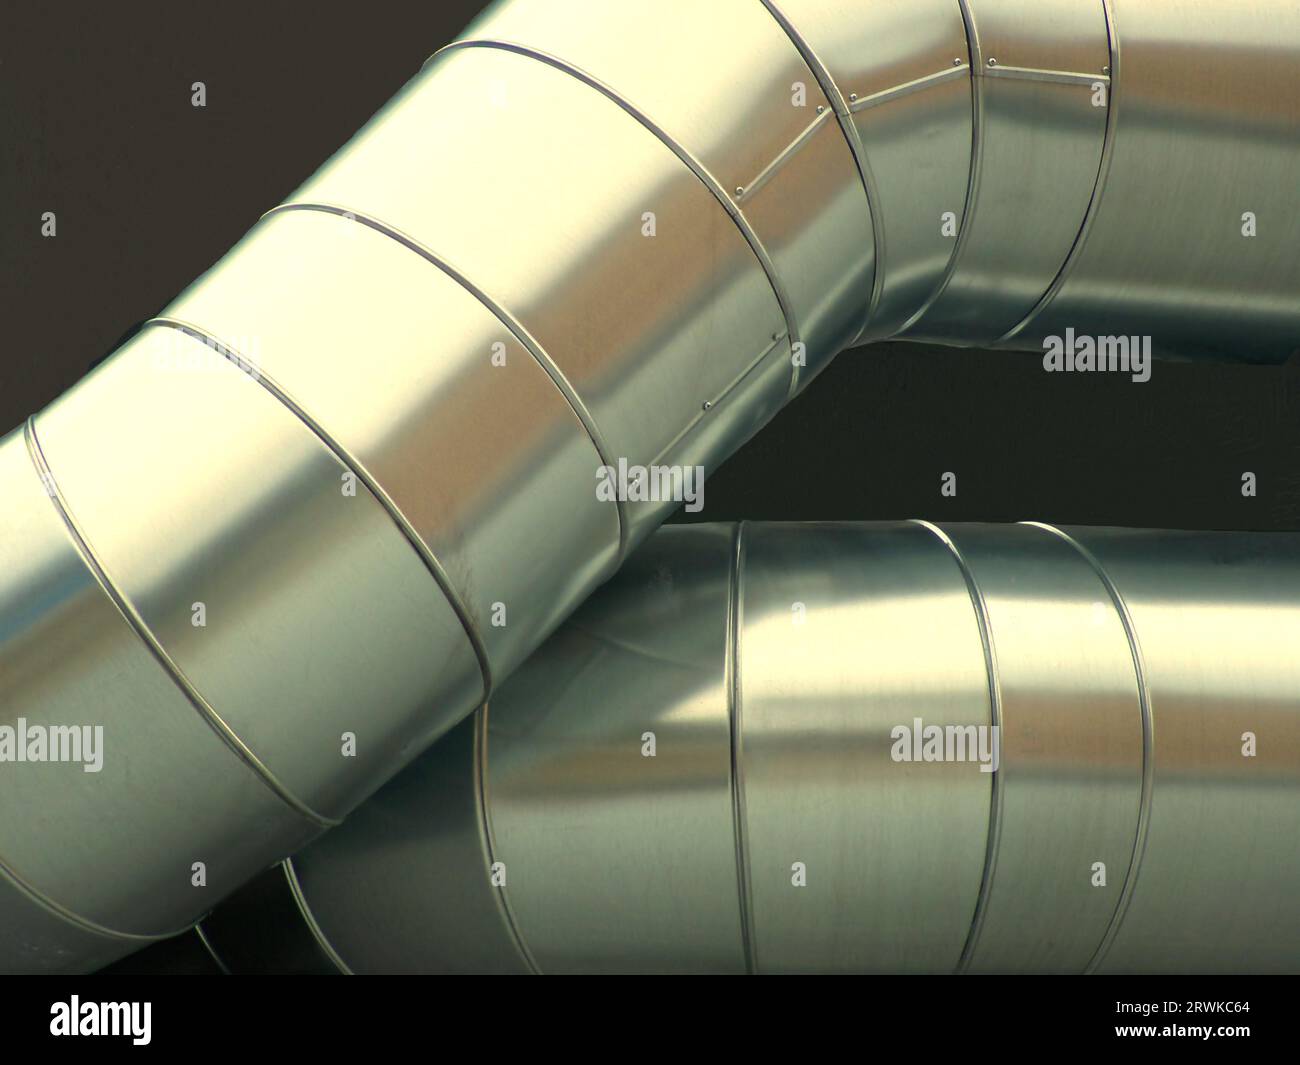 Large exhaust pipes, slightly alienated, background dark brown Stock Photo